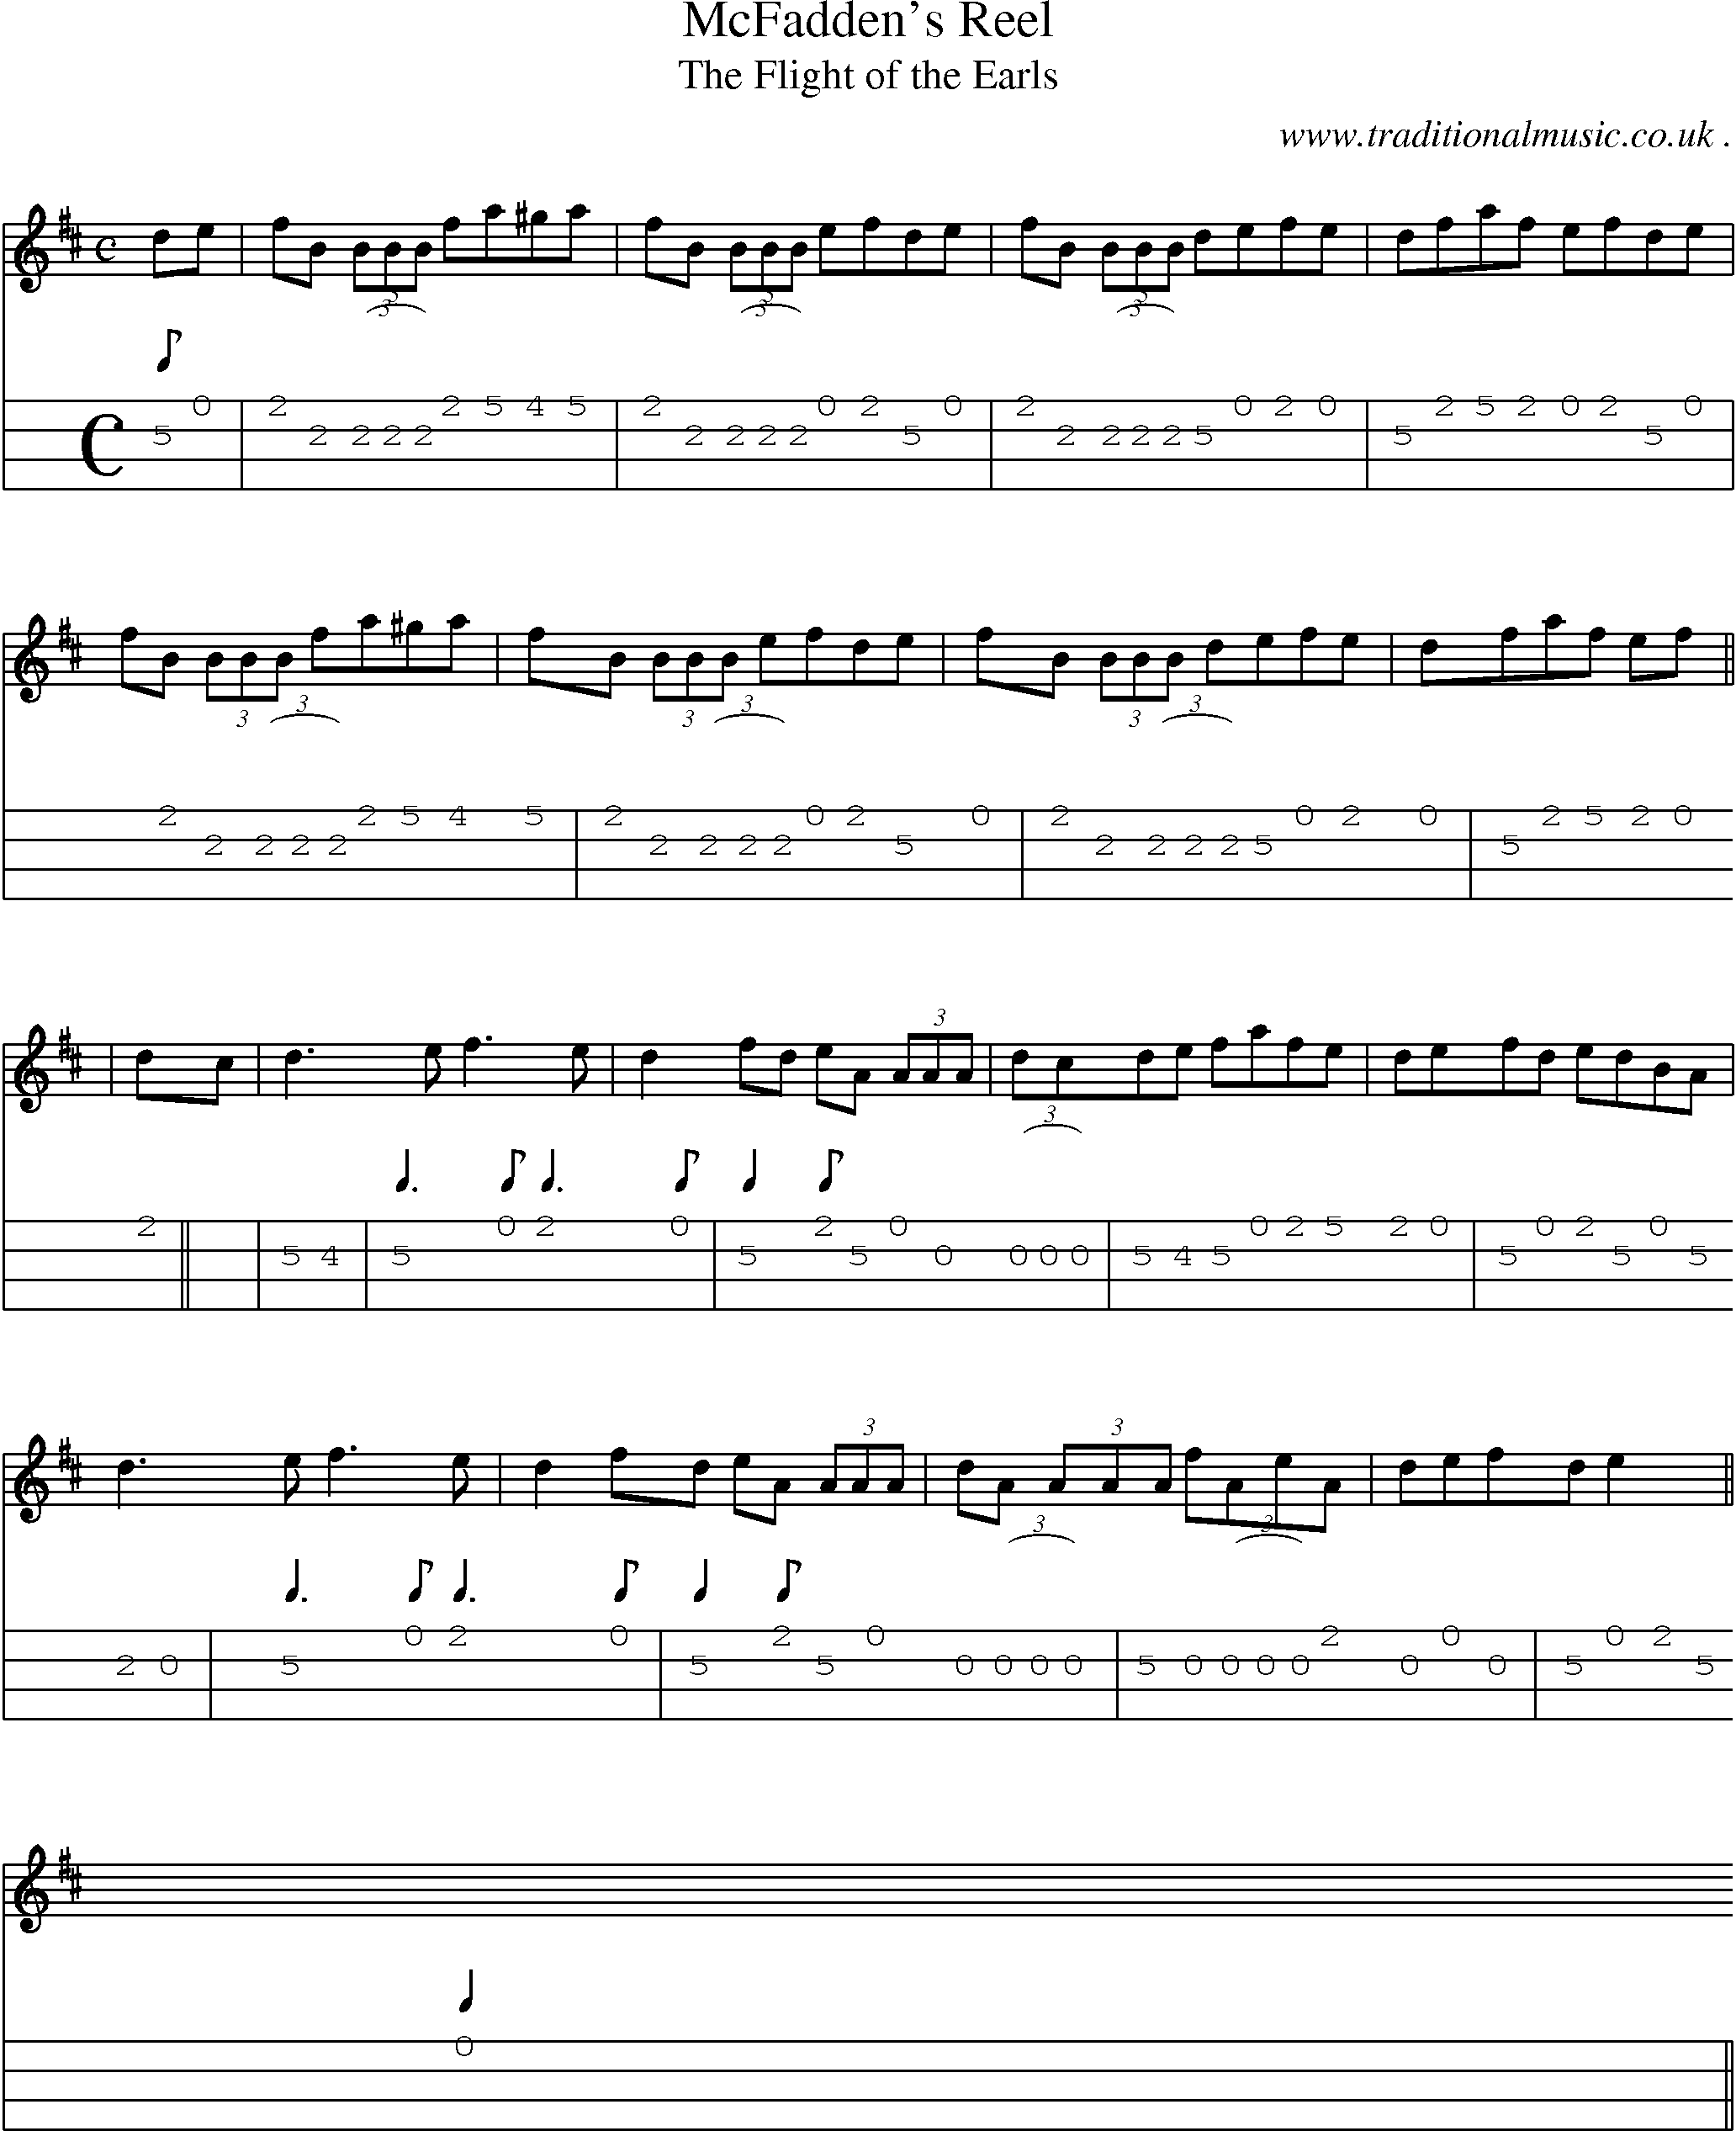 Sheet-music  score, Chords and Mandolin Tabs for Mcfaddens Reel